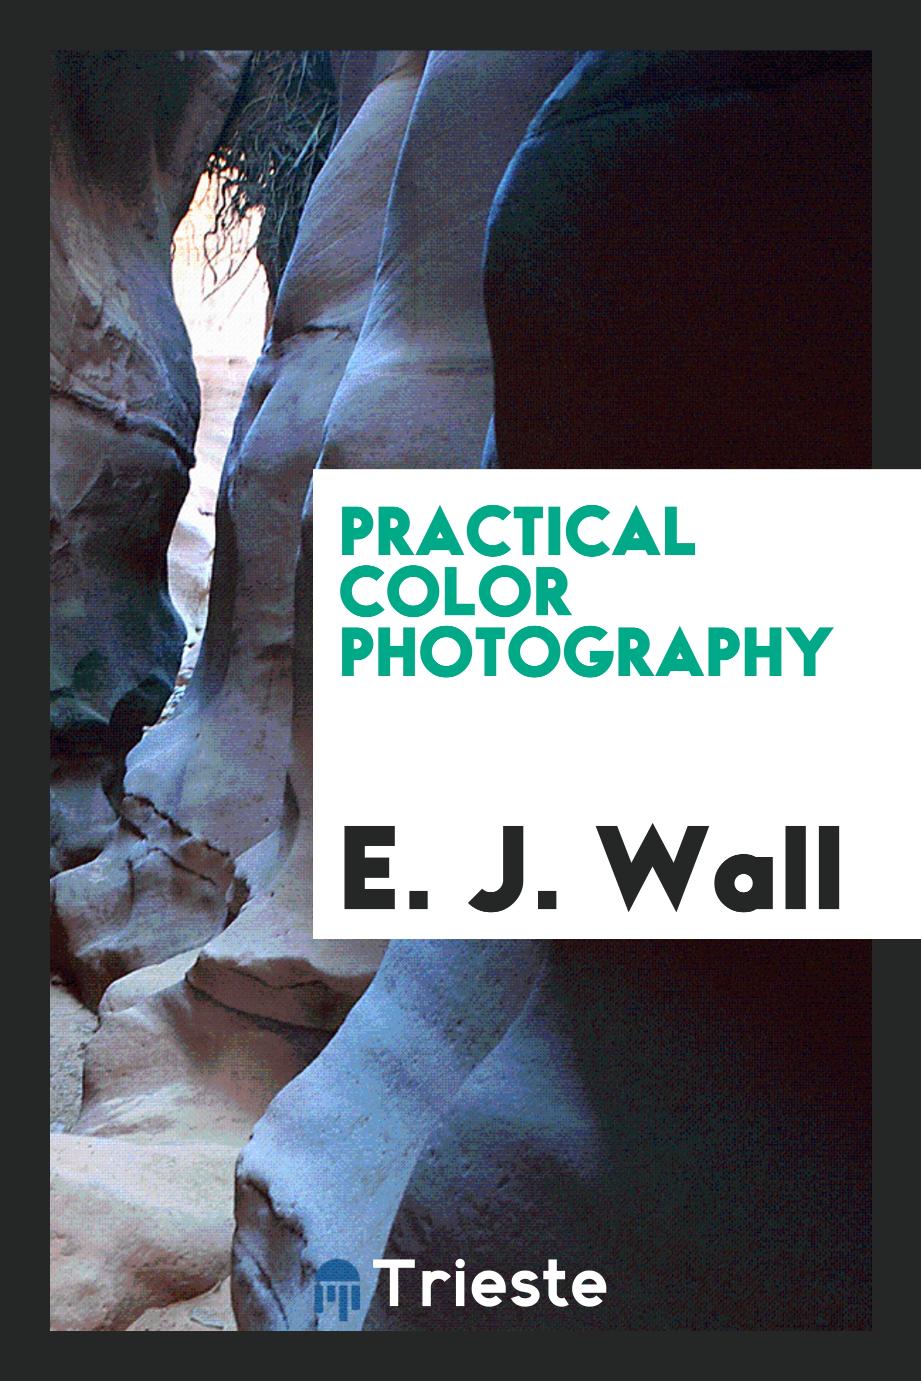 Practical color photography